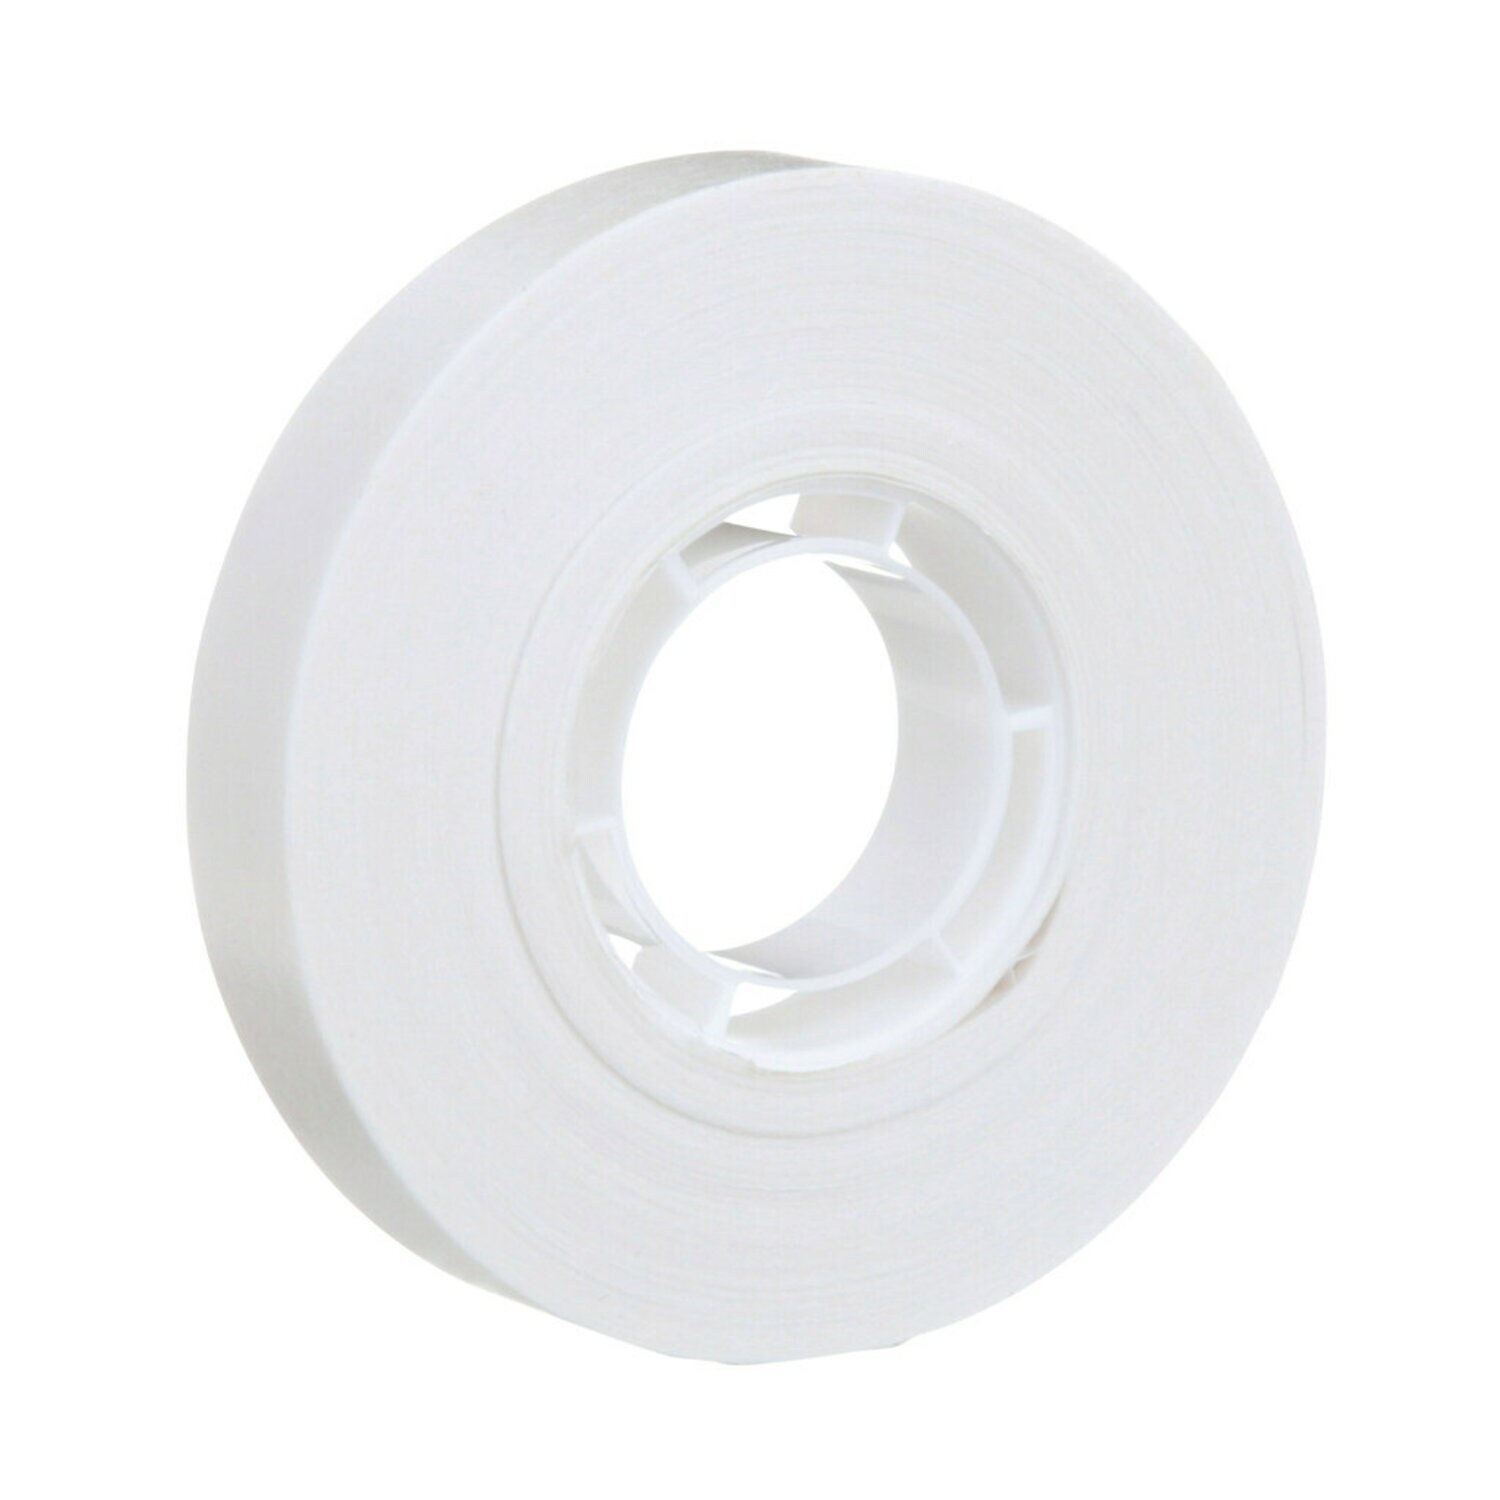 Scotch ATG Repositionable Double Coated Tissue Tape 928, Translucent White, 1/2 in x 18 yd, 2 Mil